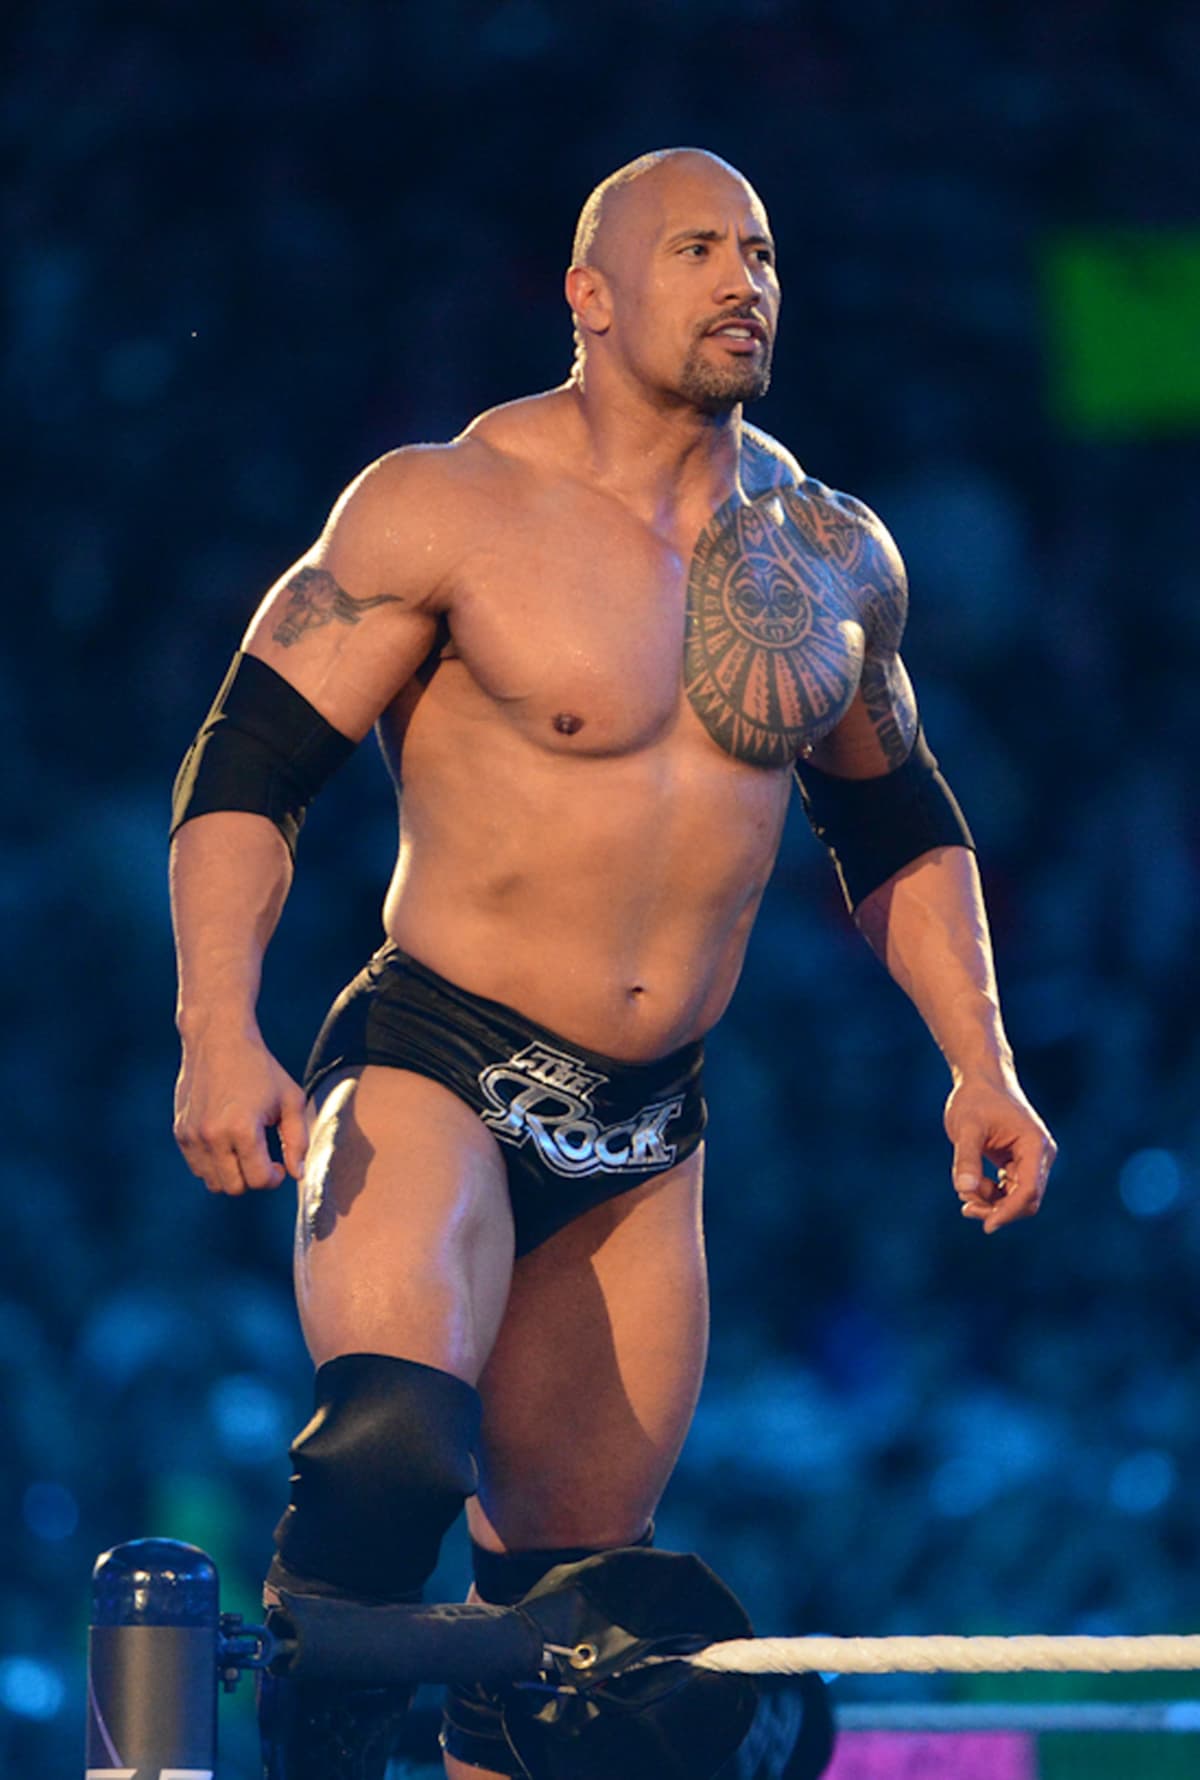 MIAMI GARDENS, FL - APRIL 1: Dwayne ''The Rock'' Johnson looks on during his match against John Cena during WrestleMania XXVIII at Sun Life Stadium on April 1, 2012 in Miami Gardens, Florida. (Photo by Ron Elkman/Sports Imagery/Getty Images)